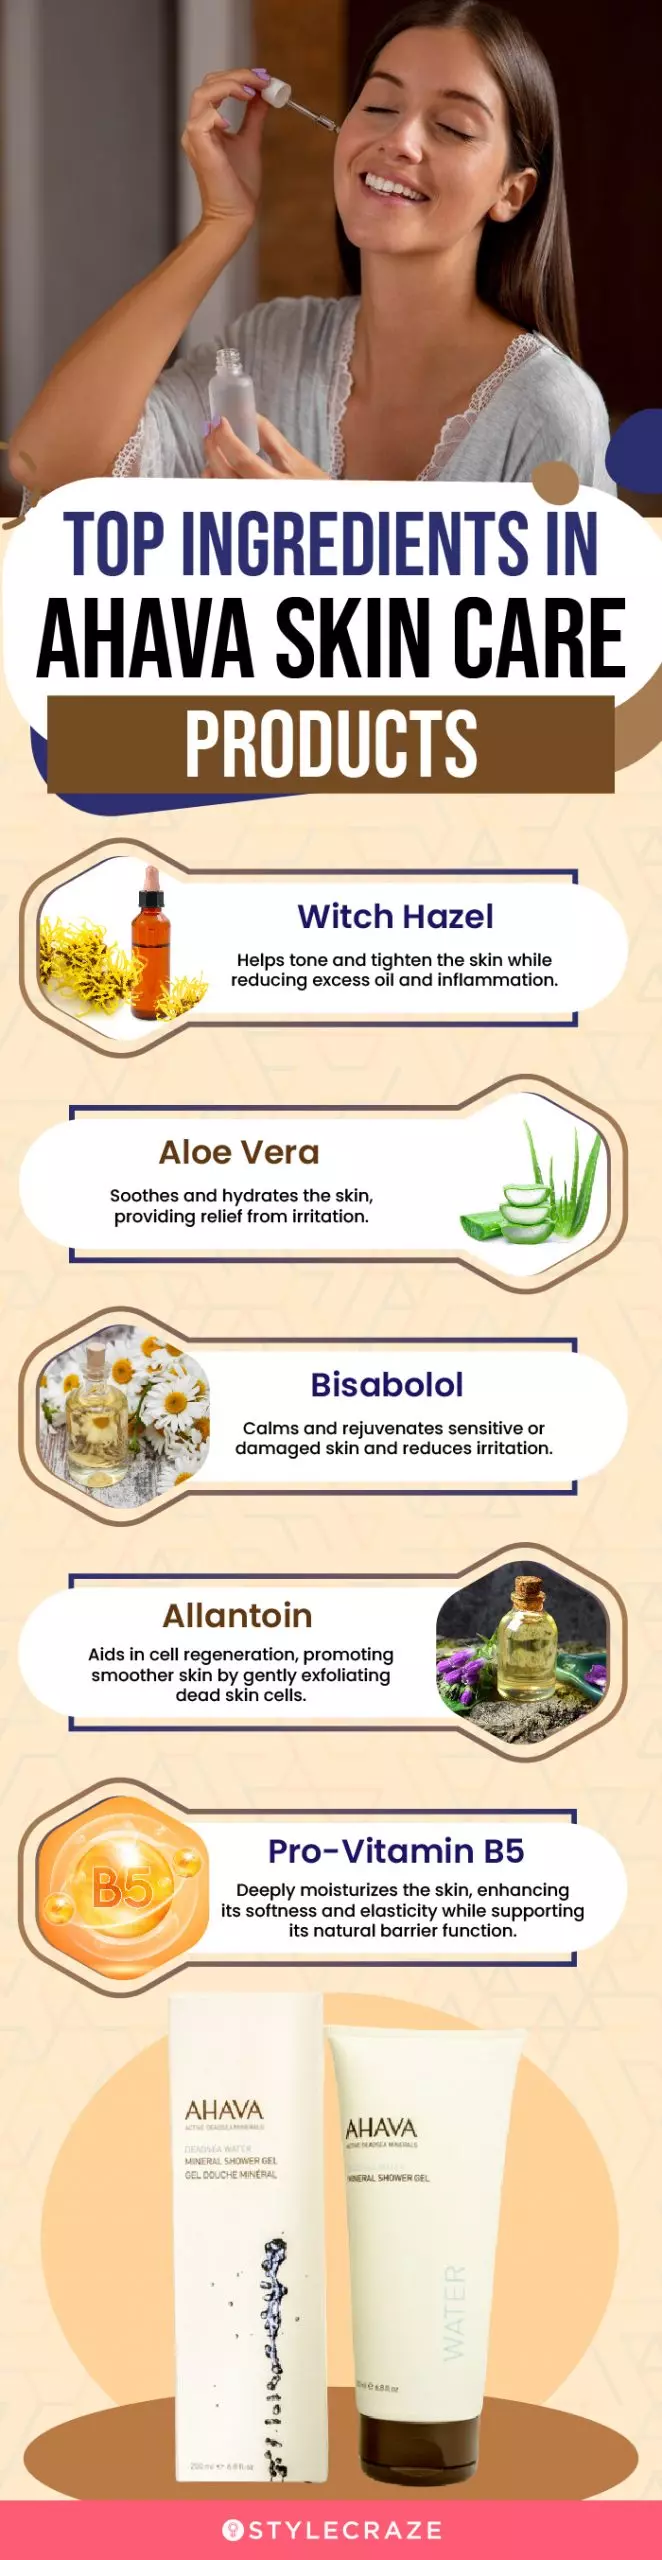 Top Ingredients In AHAVA Skin Care Products (infographic)